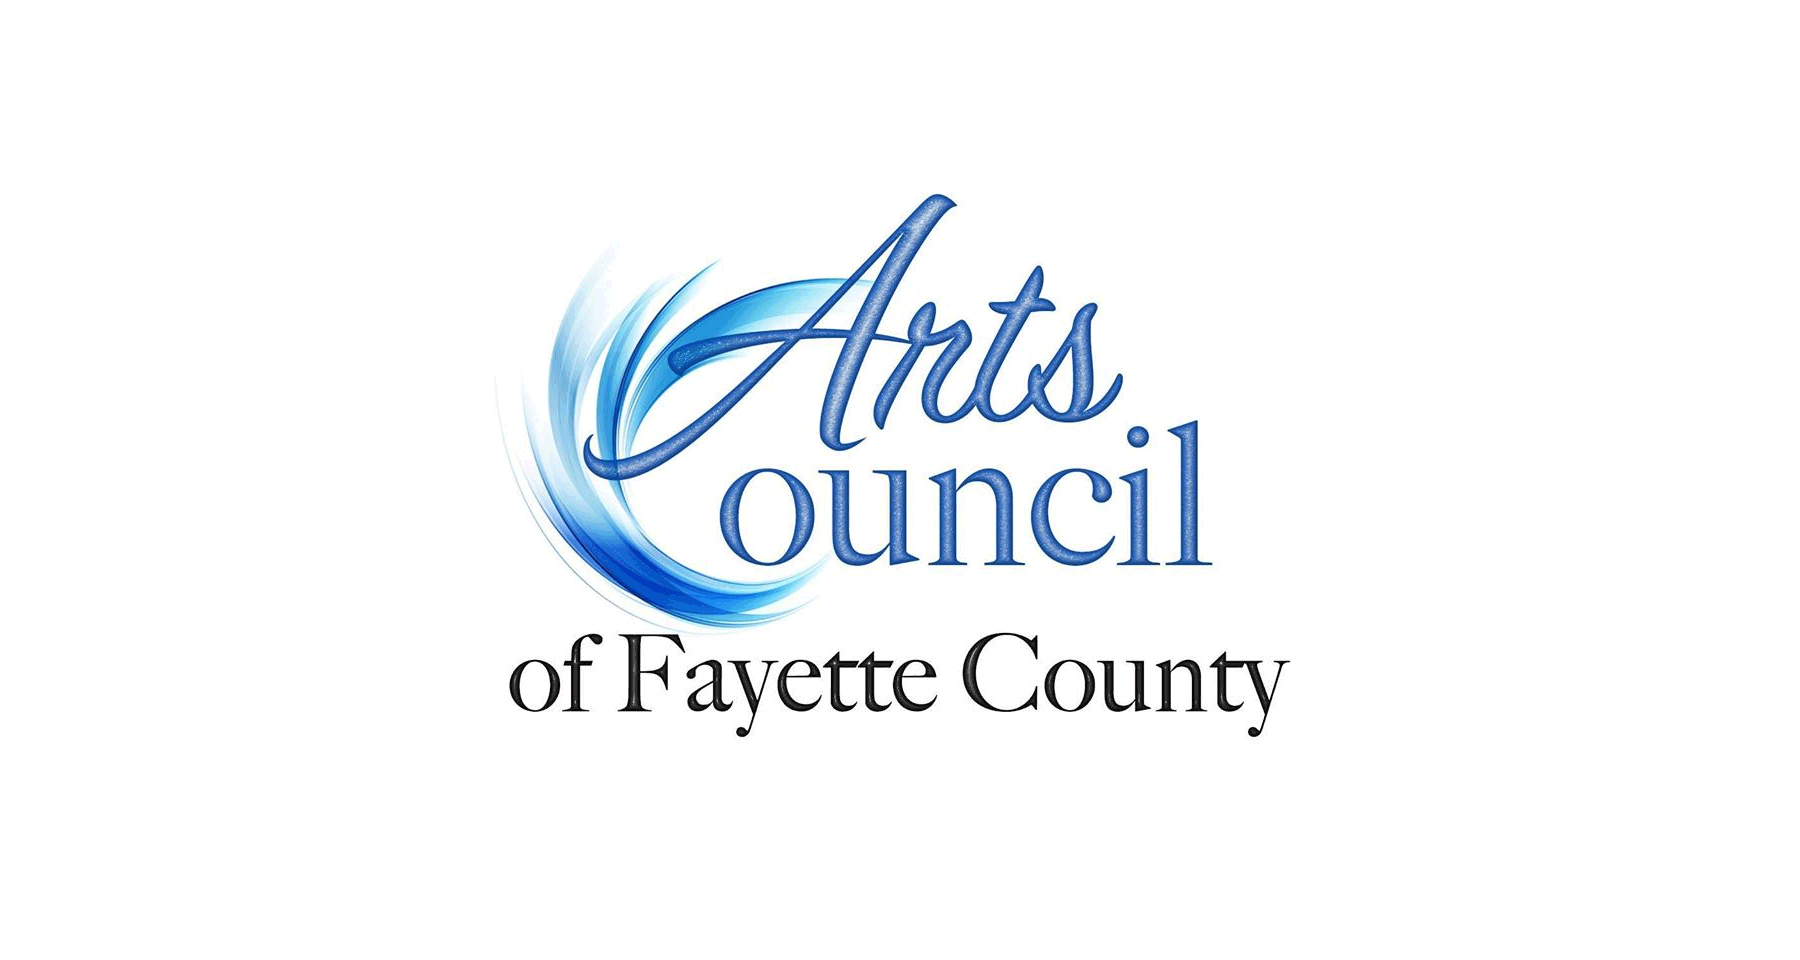 The Arts Council of Fayette County